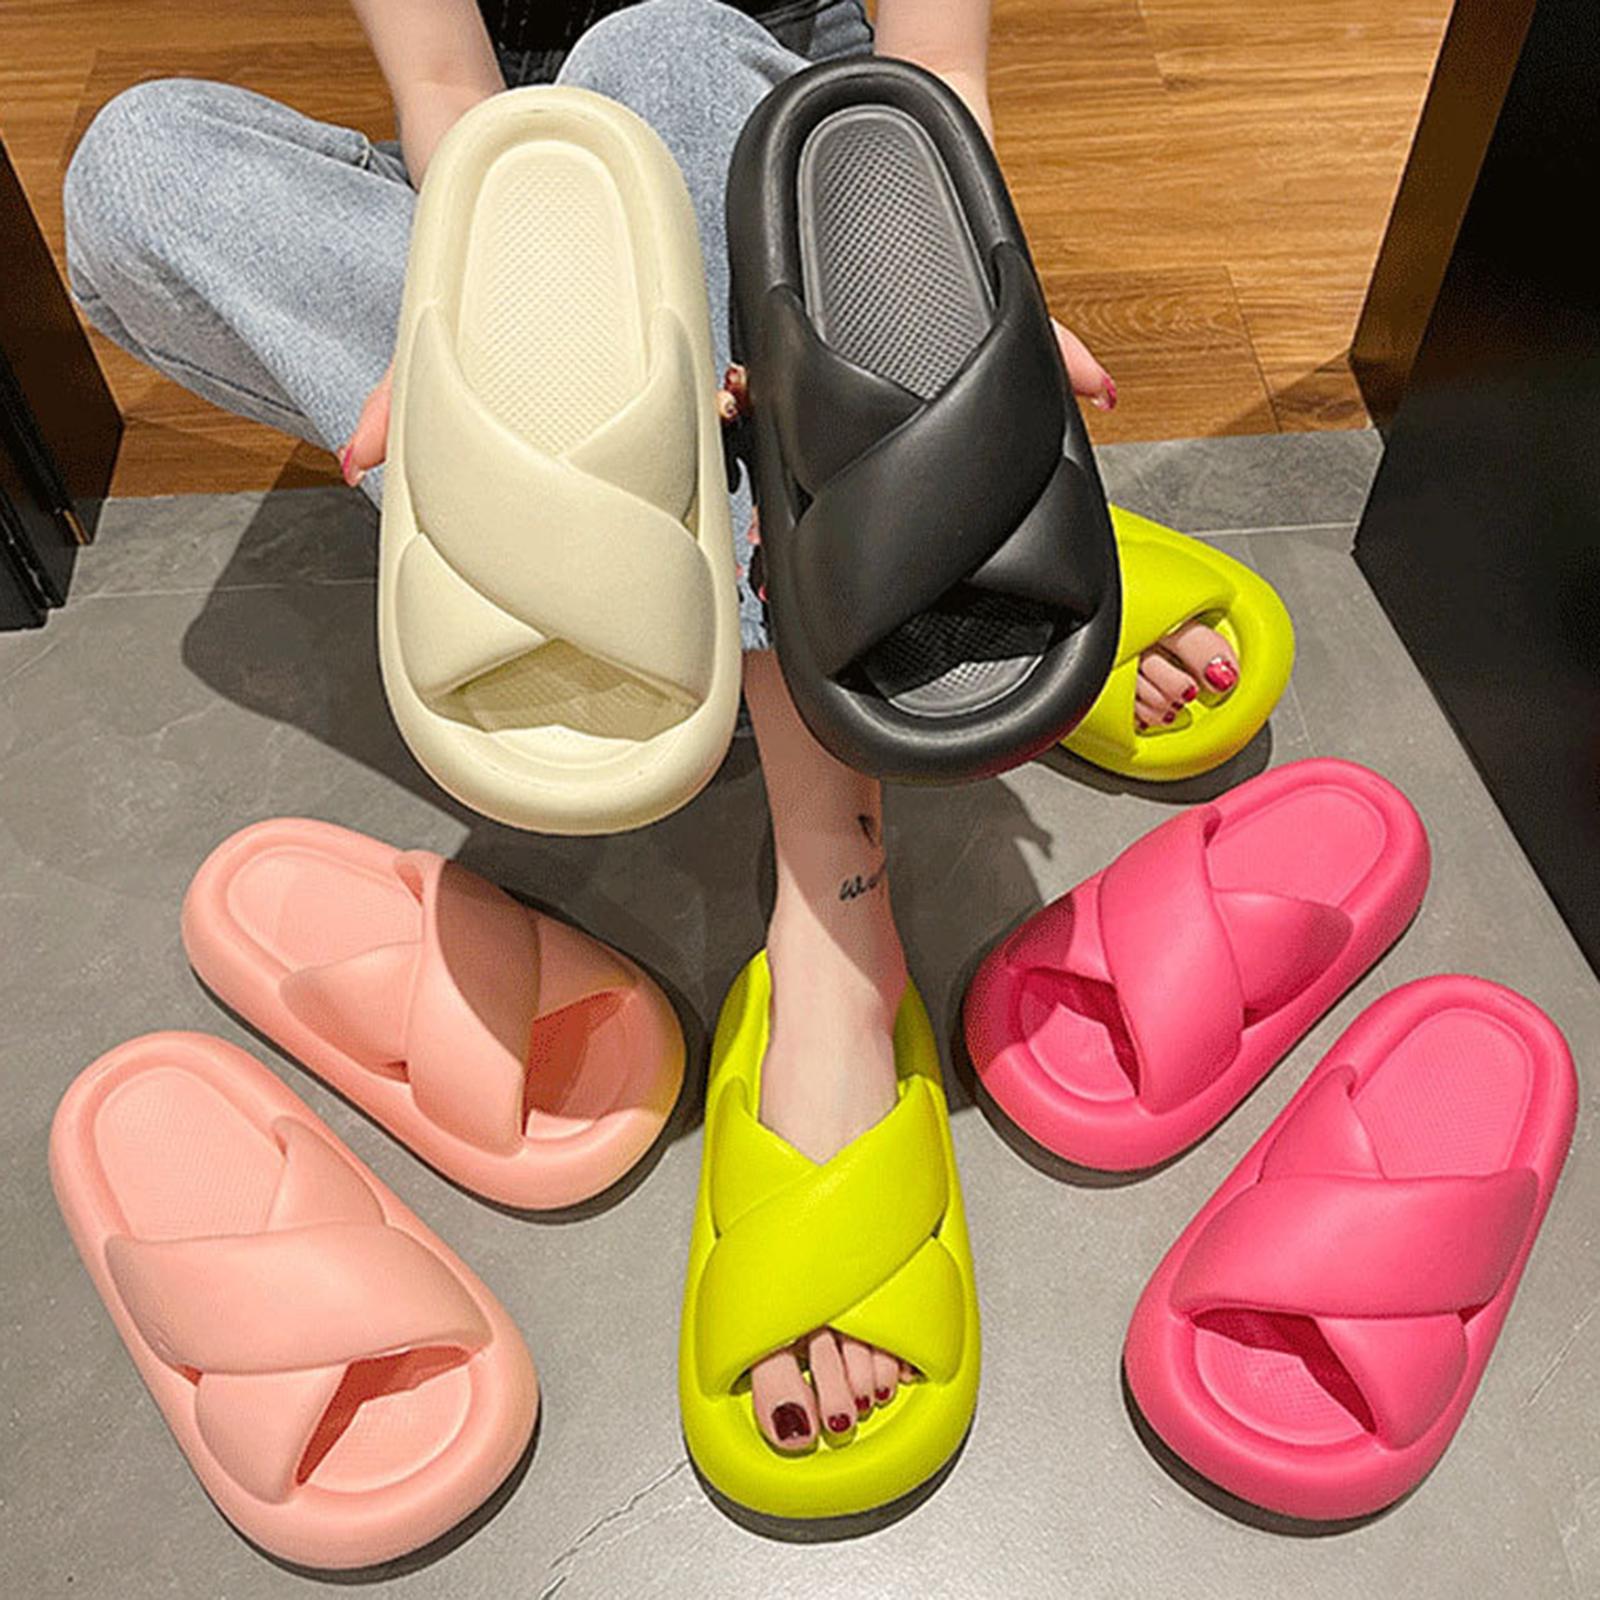 Summer Slippers House Slippers Bathroom Open Toe Sandals Home Thick Sole 36cm to 38cm